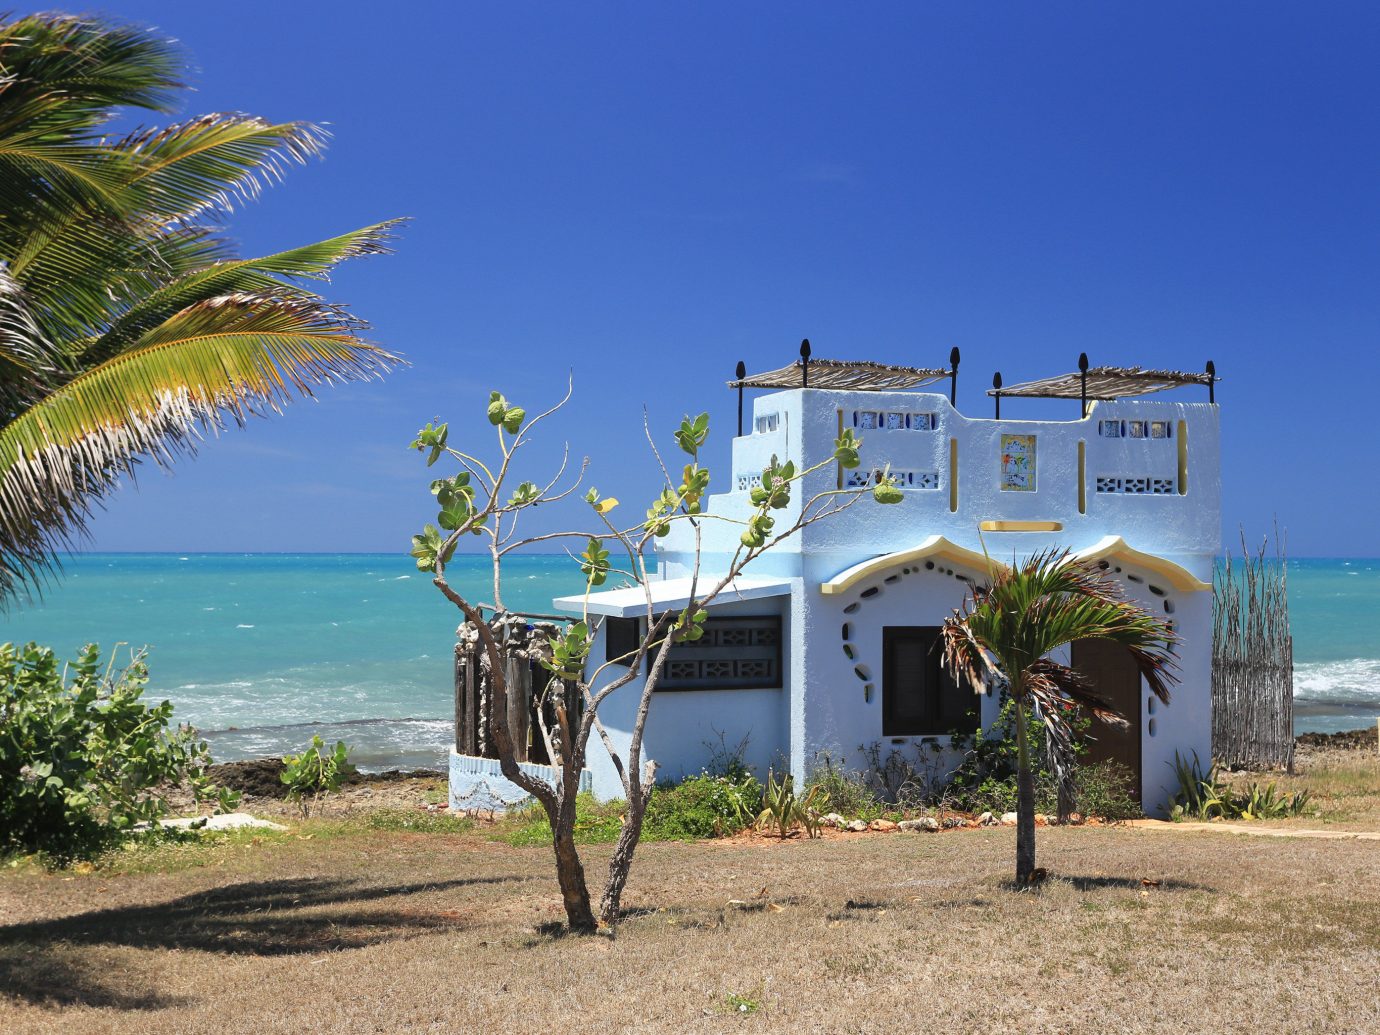 Exterior view of a ocean side cottage in Jamaica